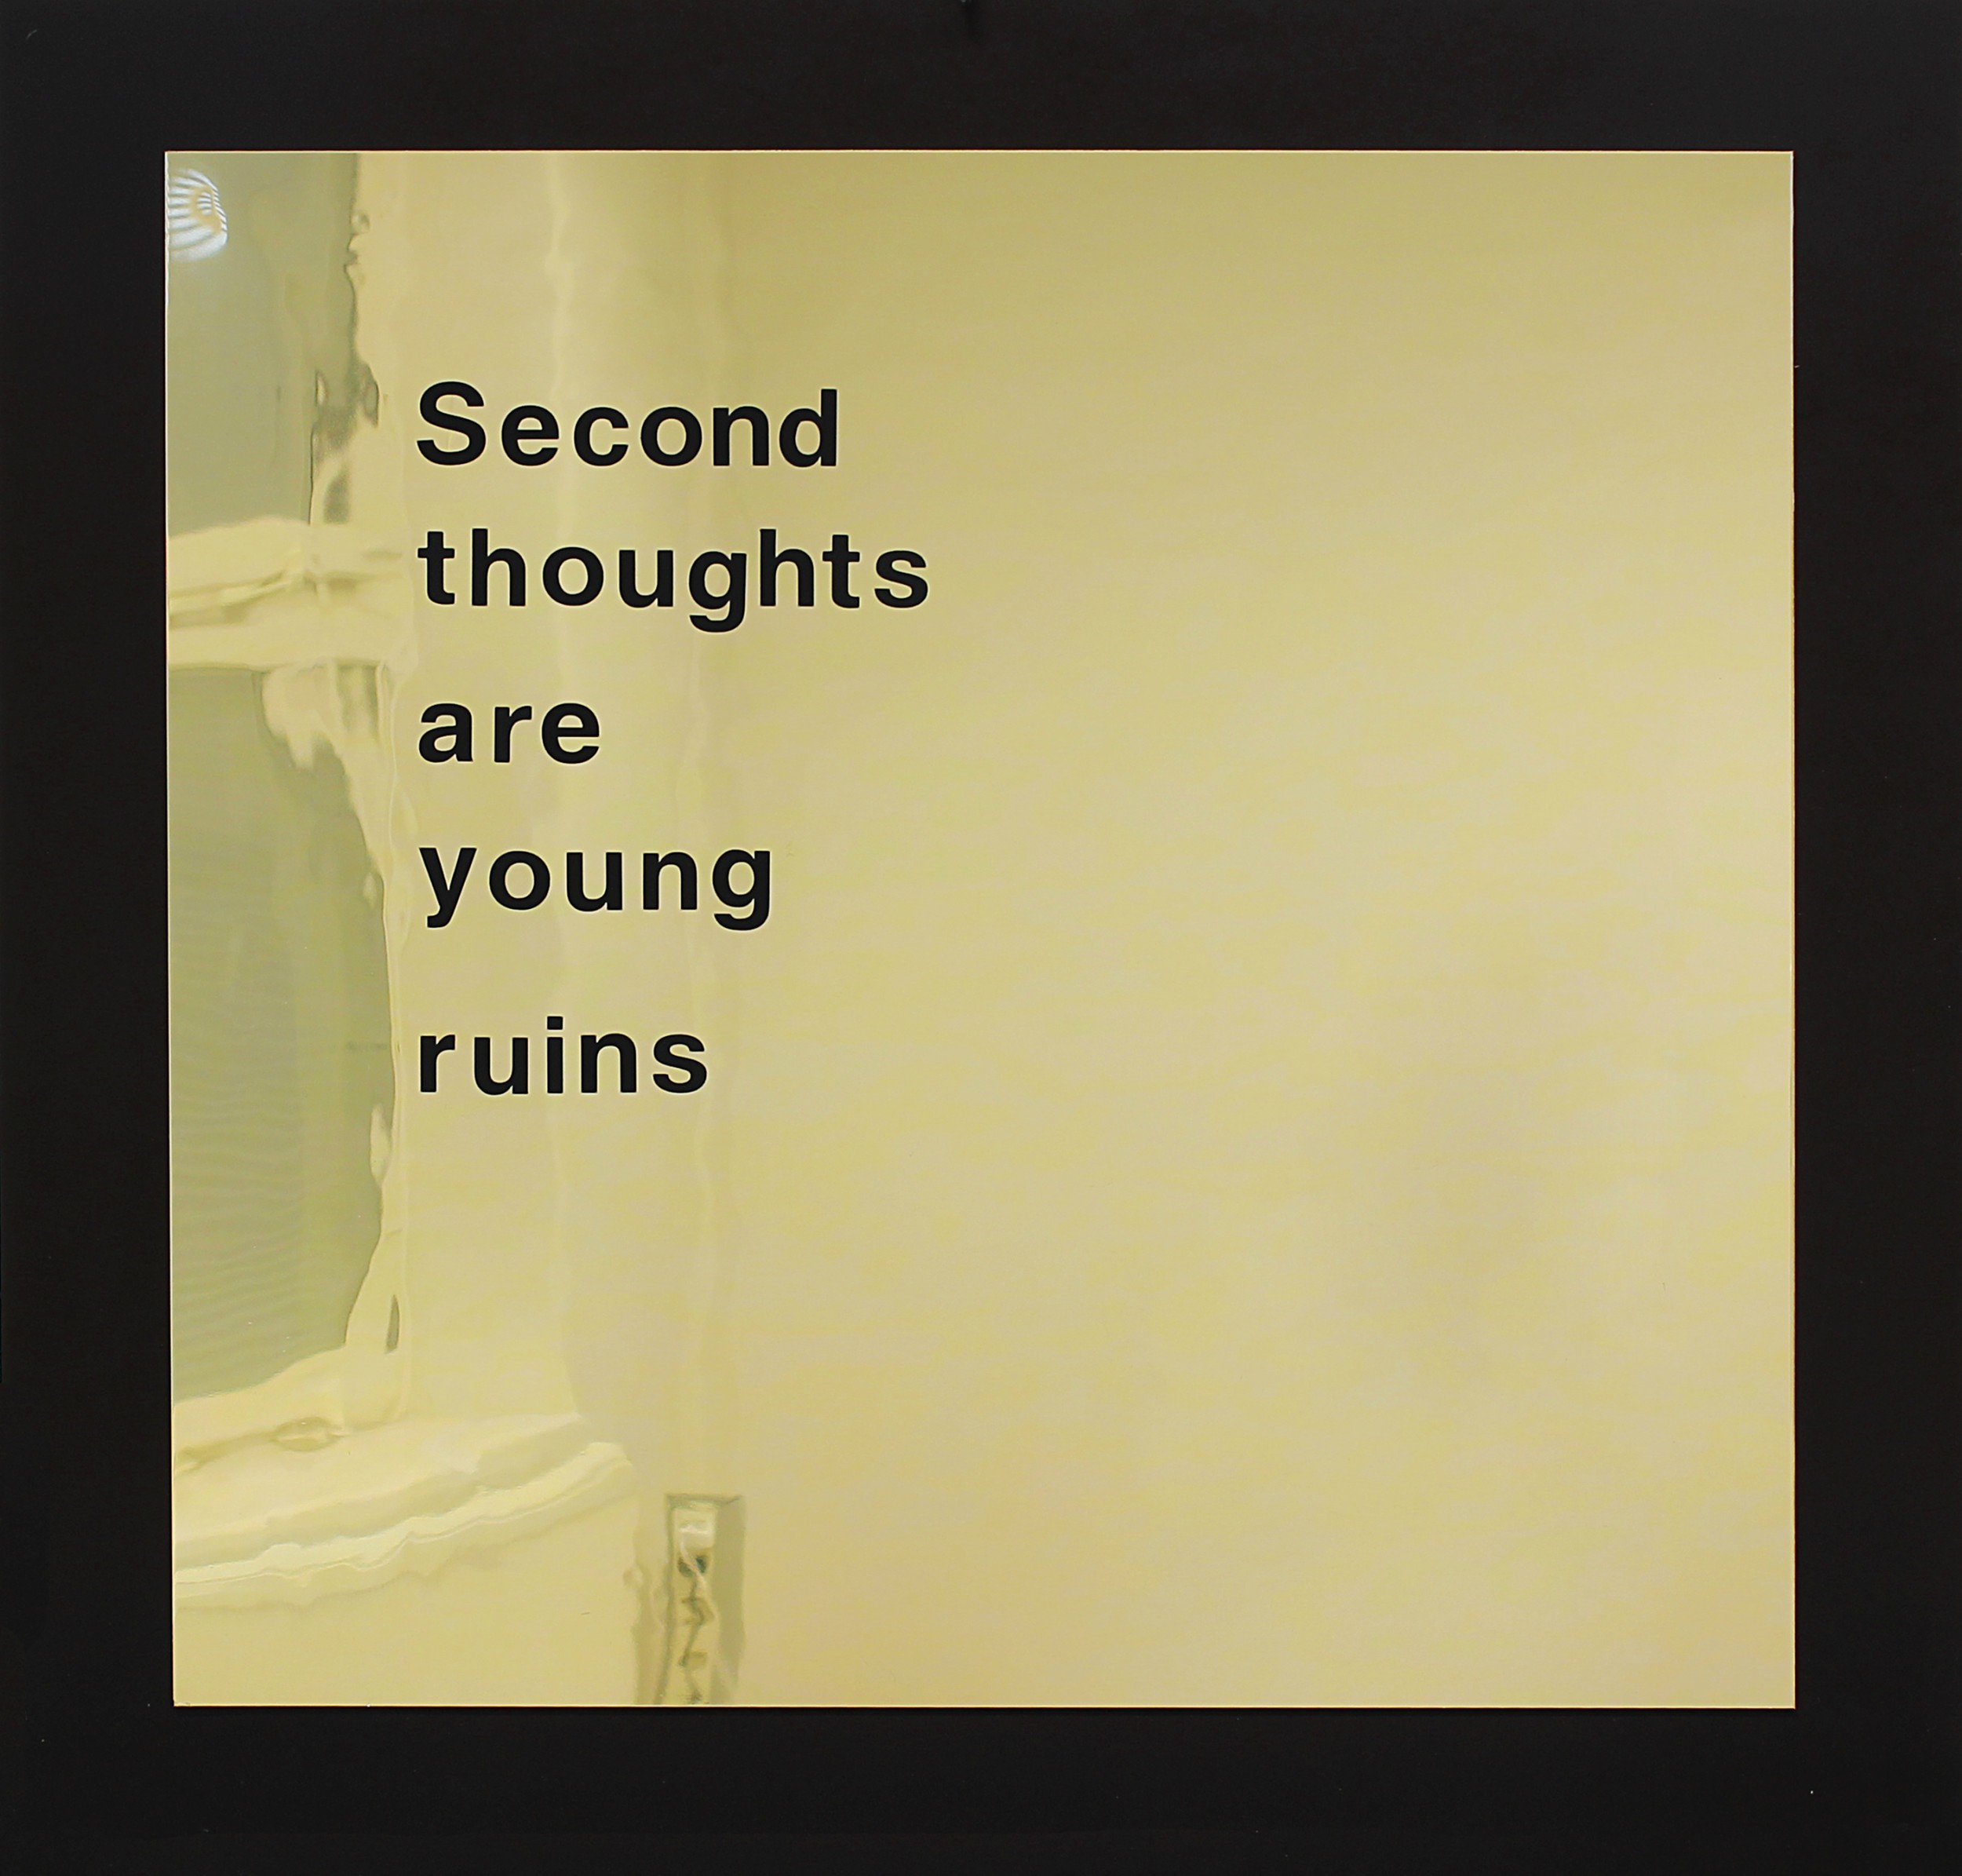 Alex Mirutziu, Second thoughts are young ruins, 2015